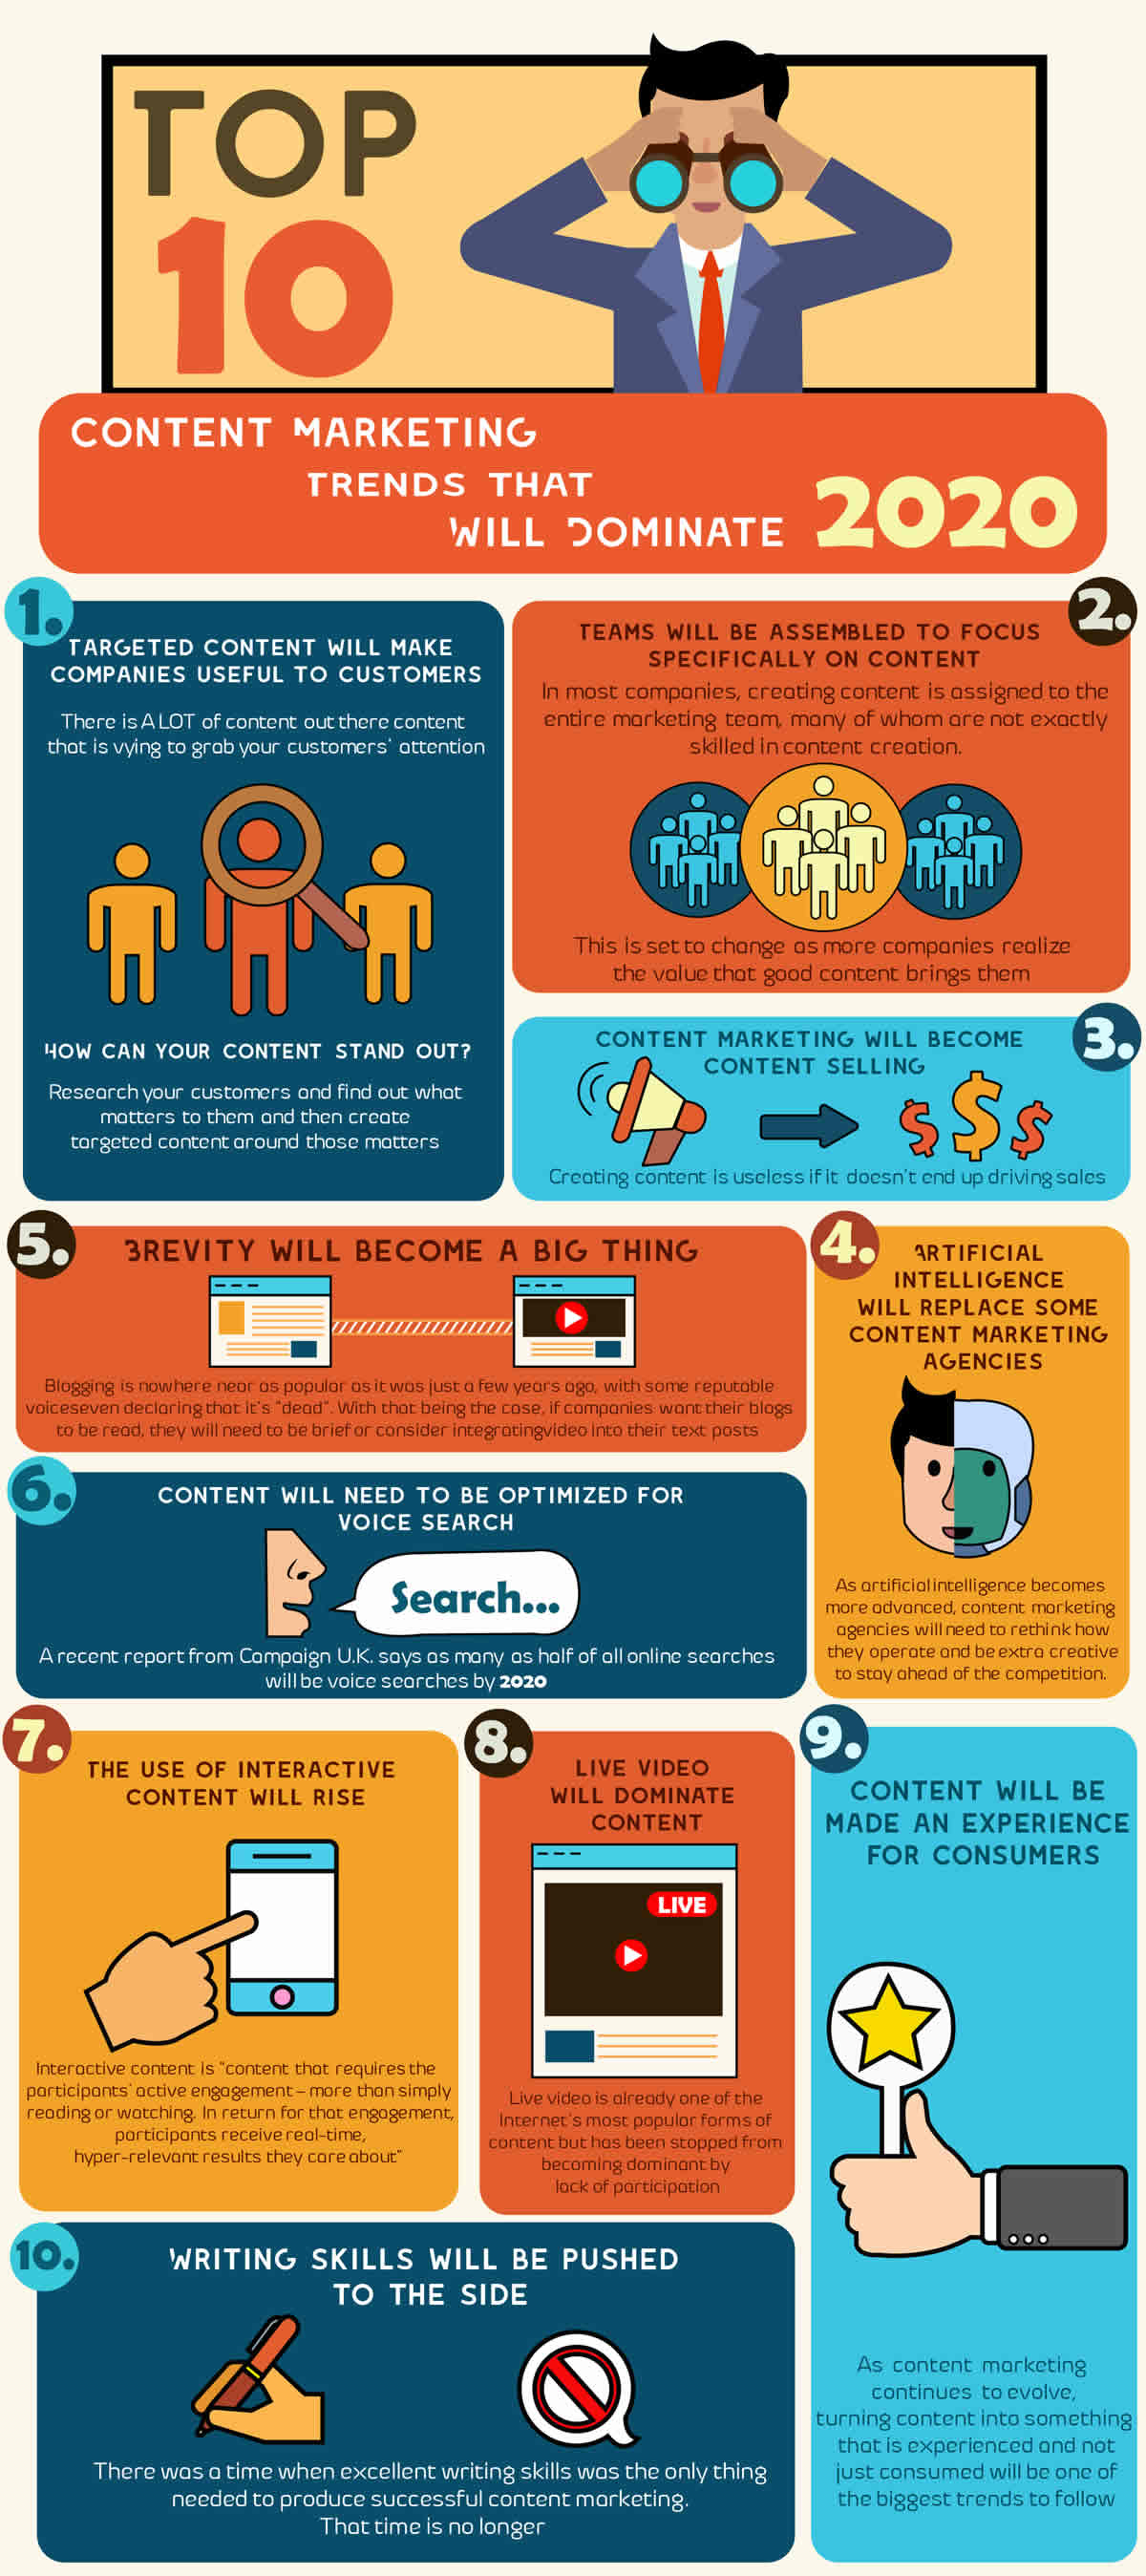 Top 10 Content Marketing Trends In 2020 Infographic Clayton Nc Web